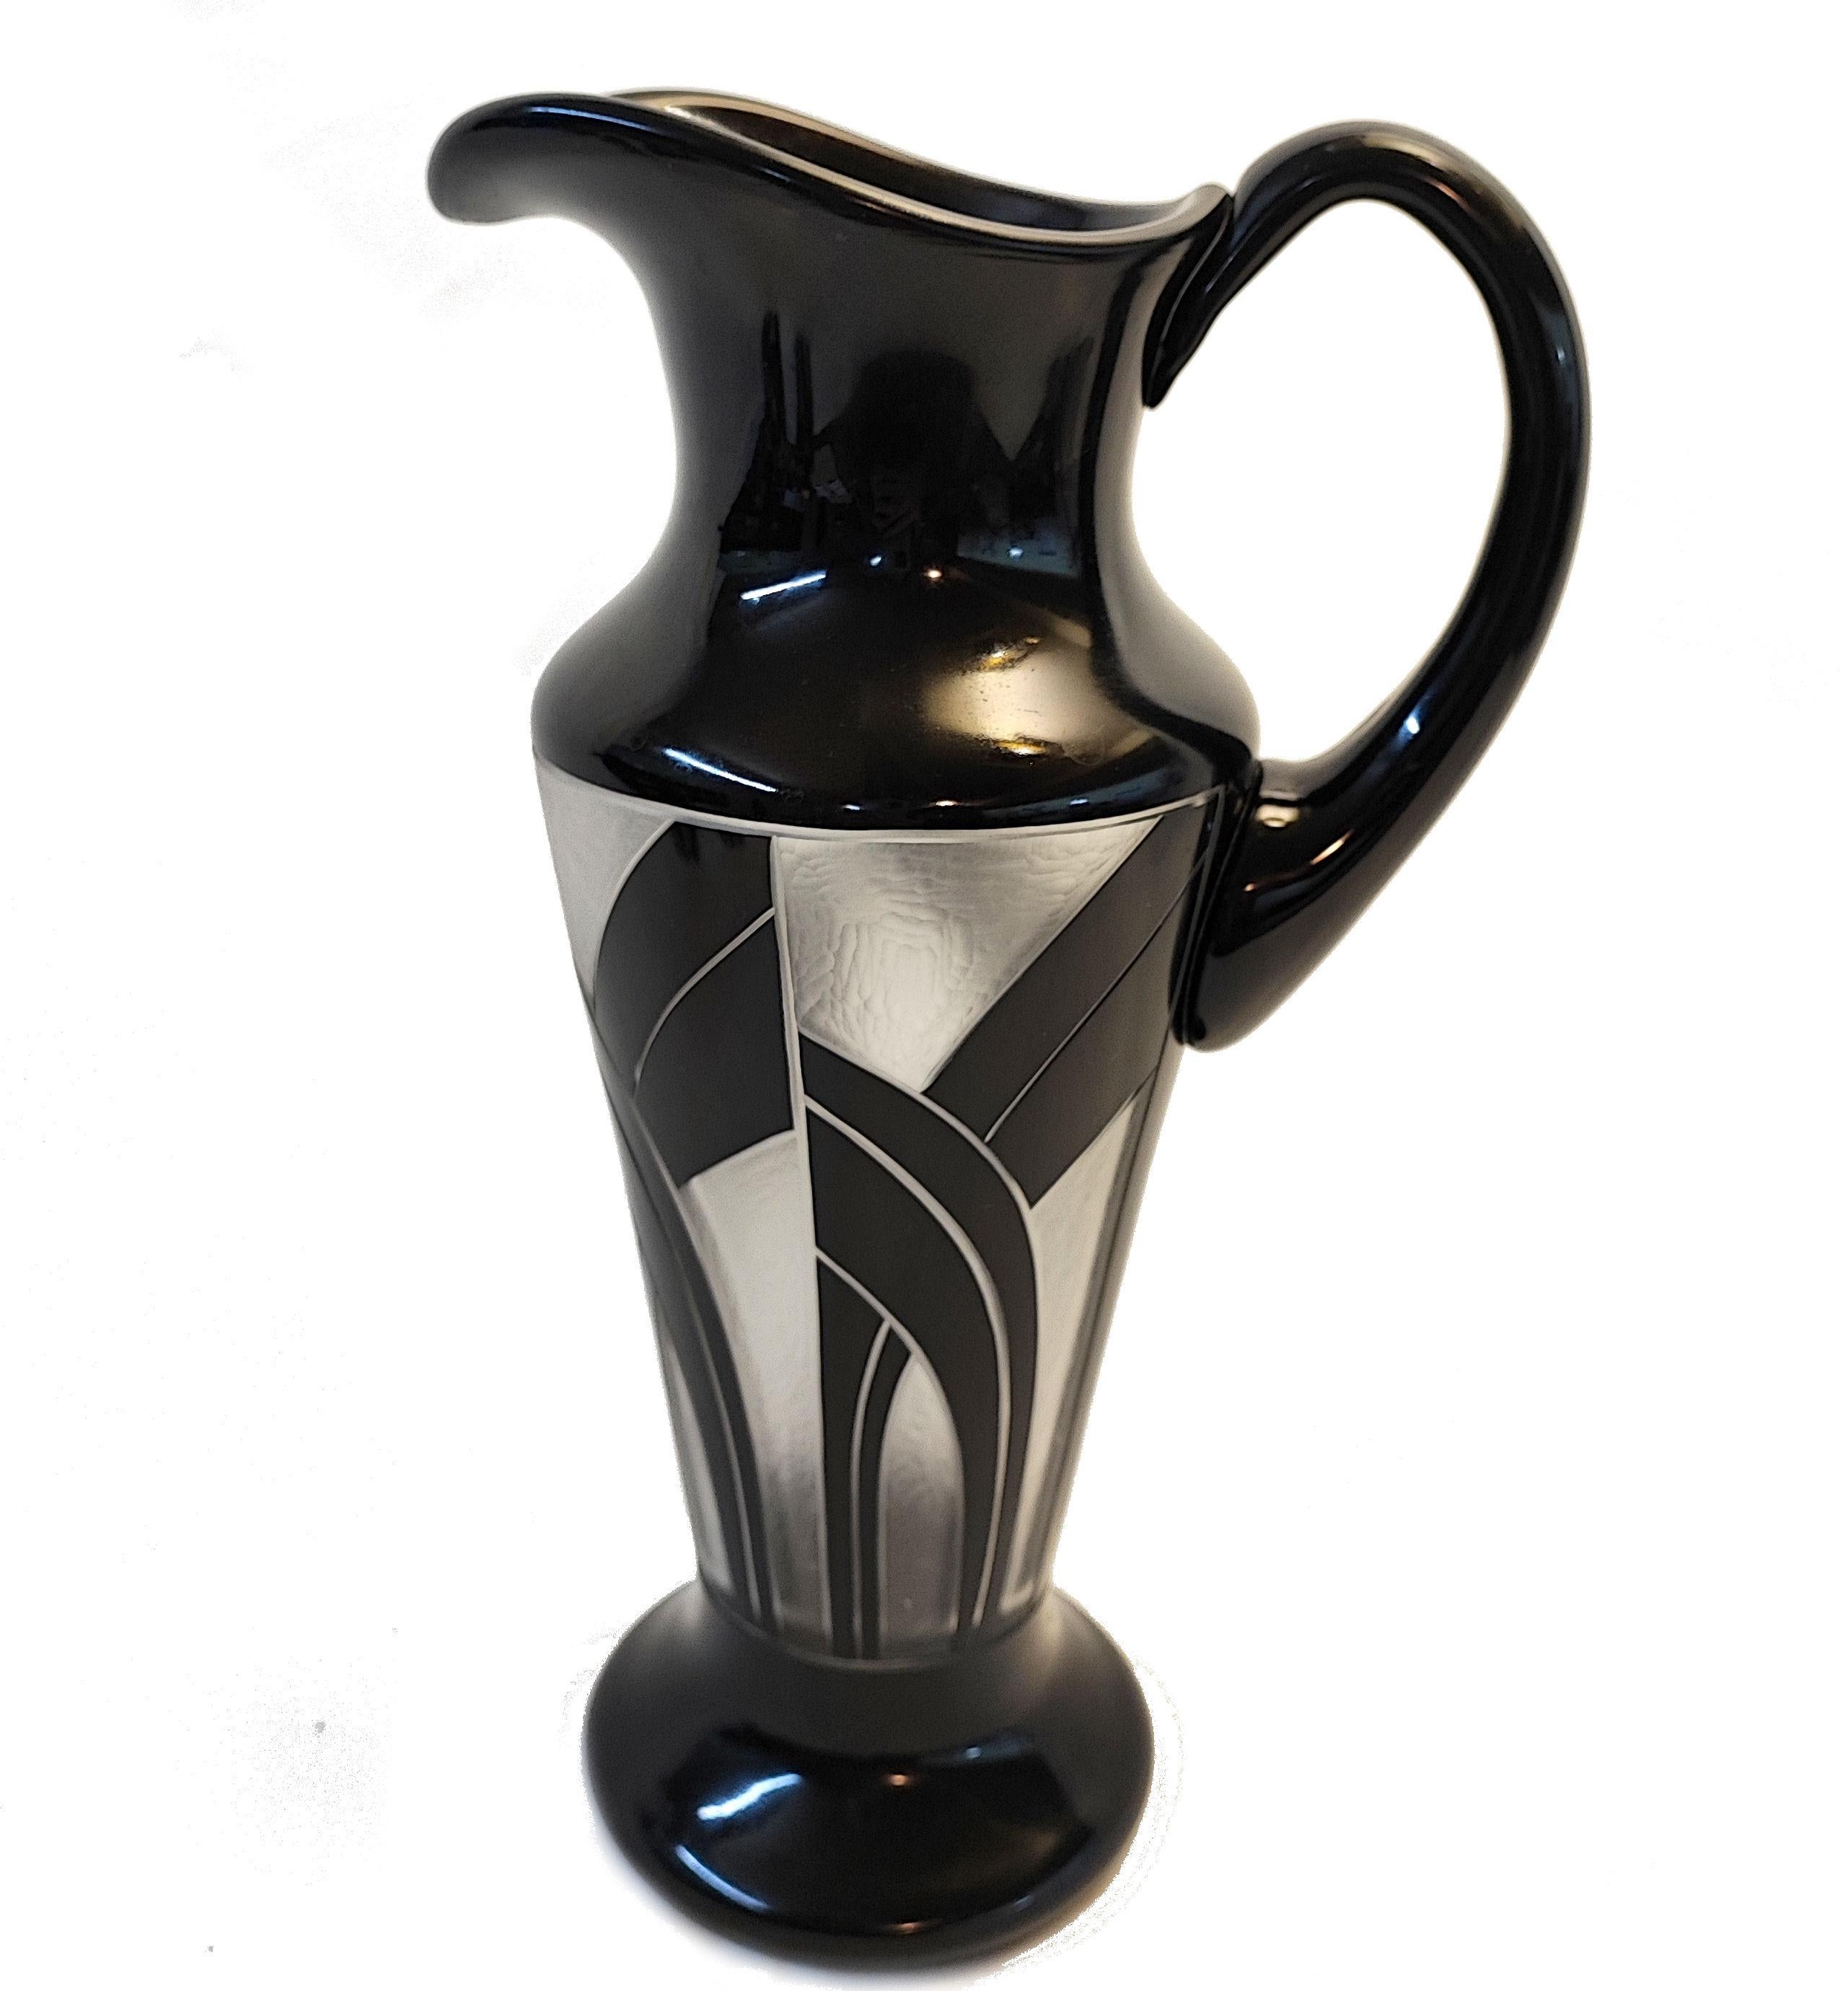 Very high quality, very striking looking 1930's Art Deco Czech glass cocktail set. Features a classic shape crystal jug with six matching decent sized glasses (height 8 cm Dia 6 cm) . The whole set is enamelled in black with acid etched geometric